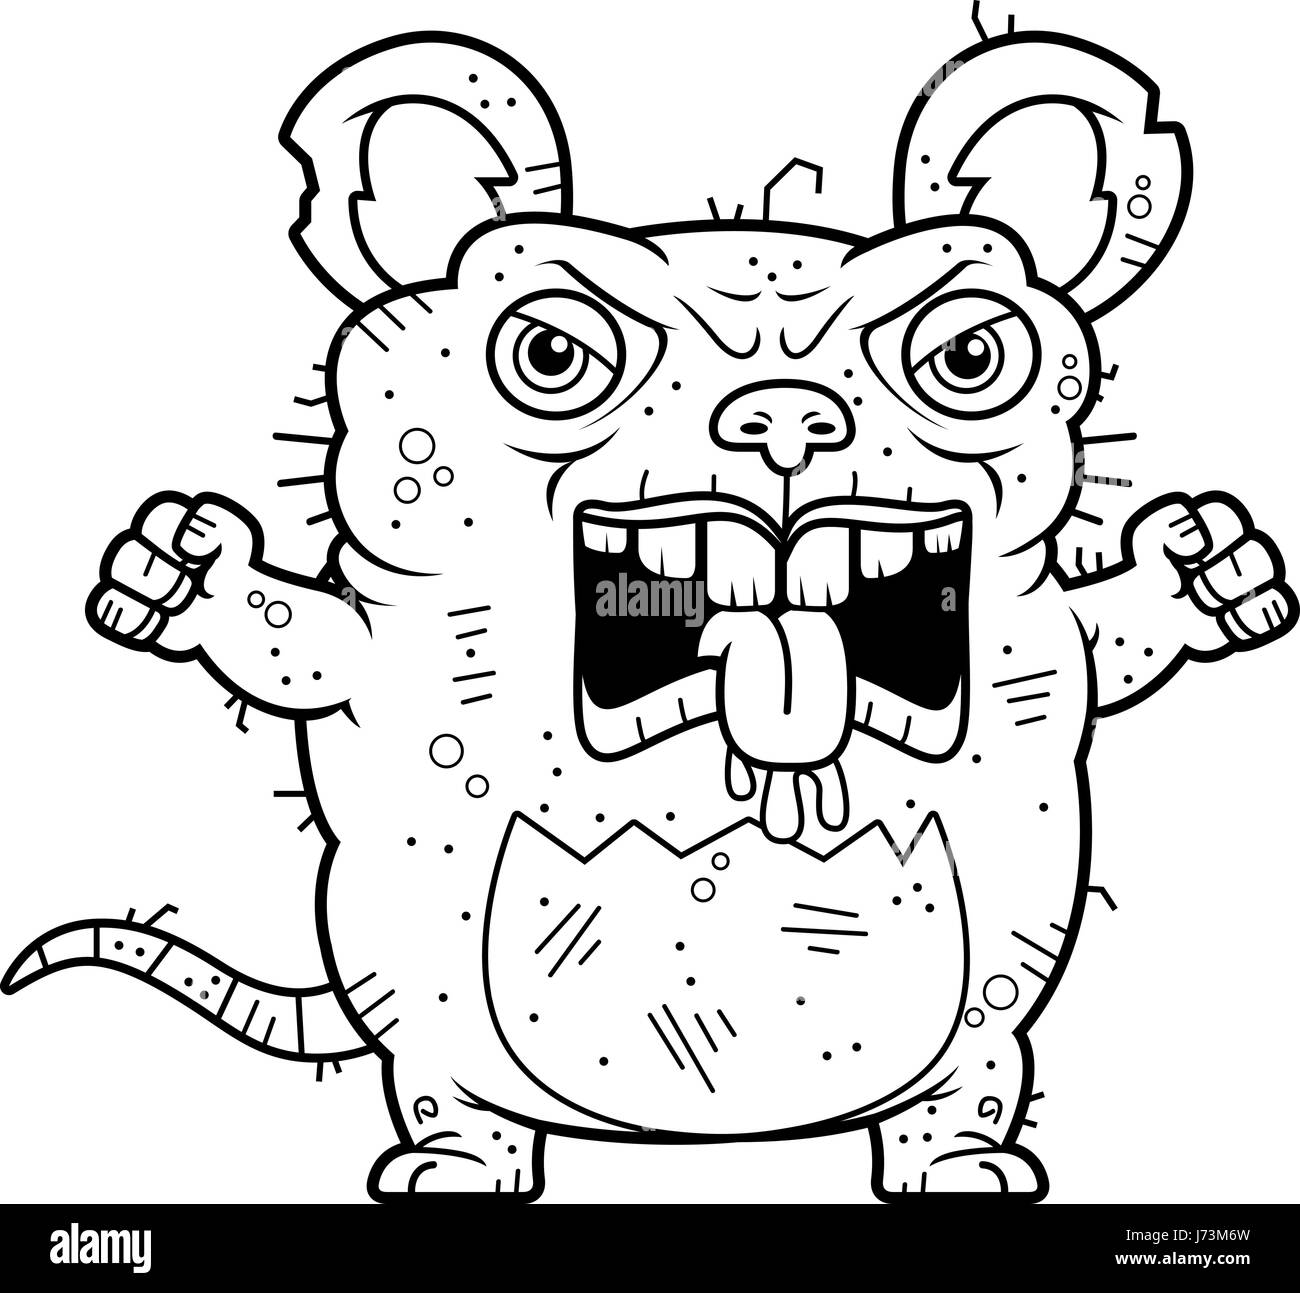 A cartoon illustration of an ugly rat looking angry. Stock Vector